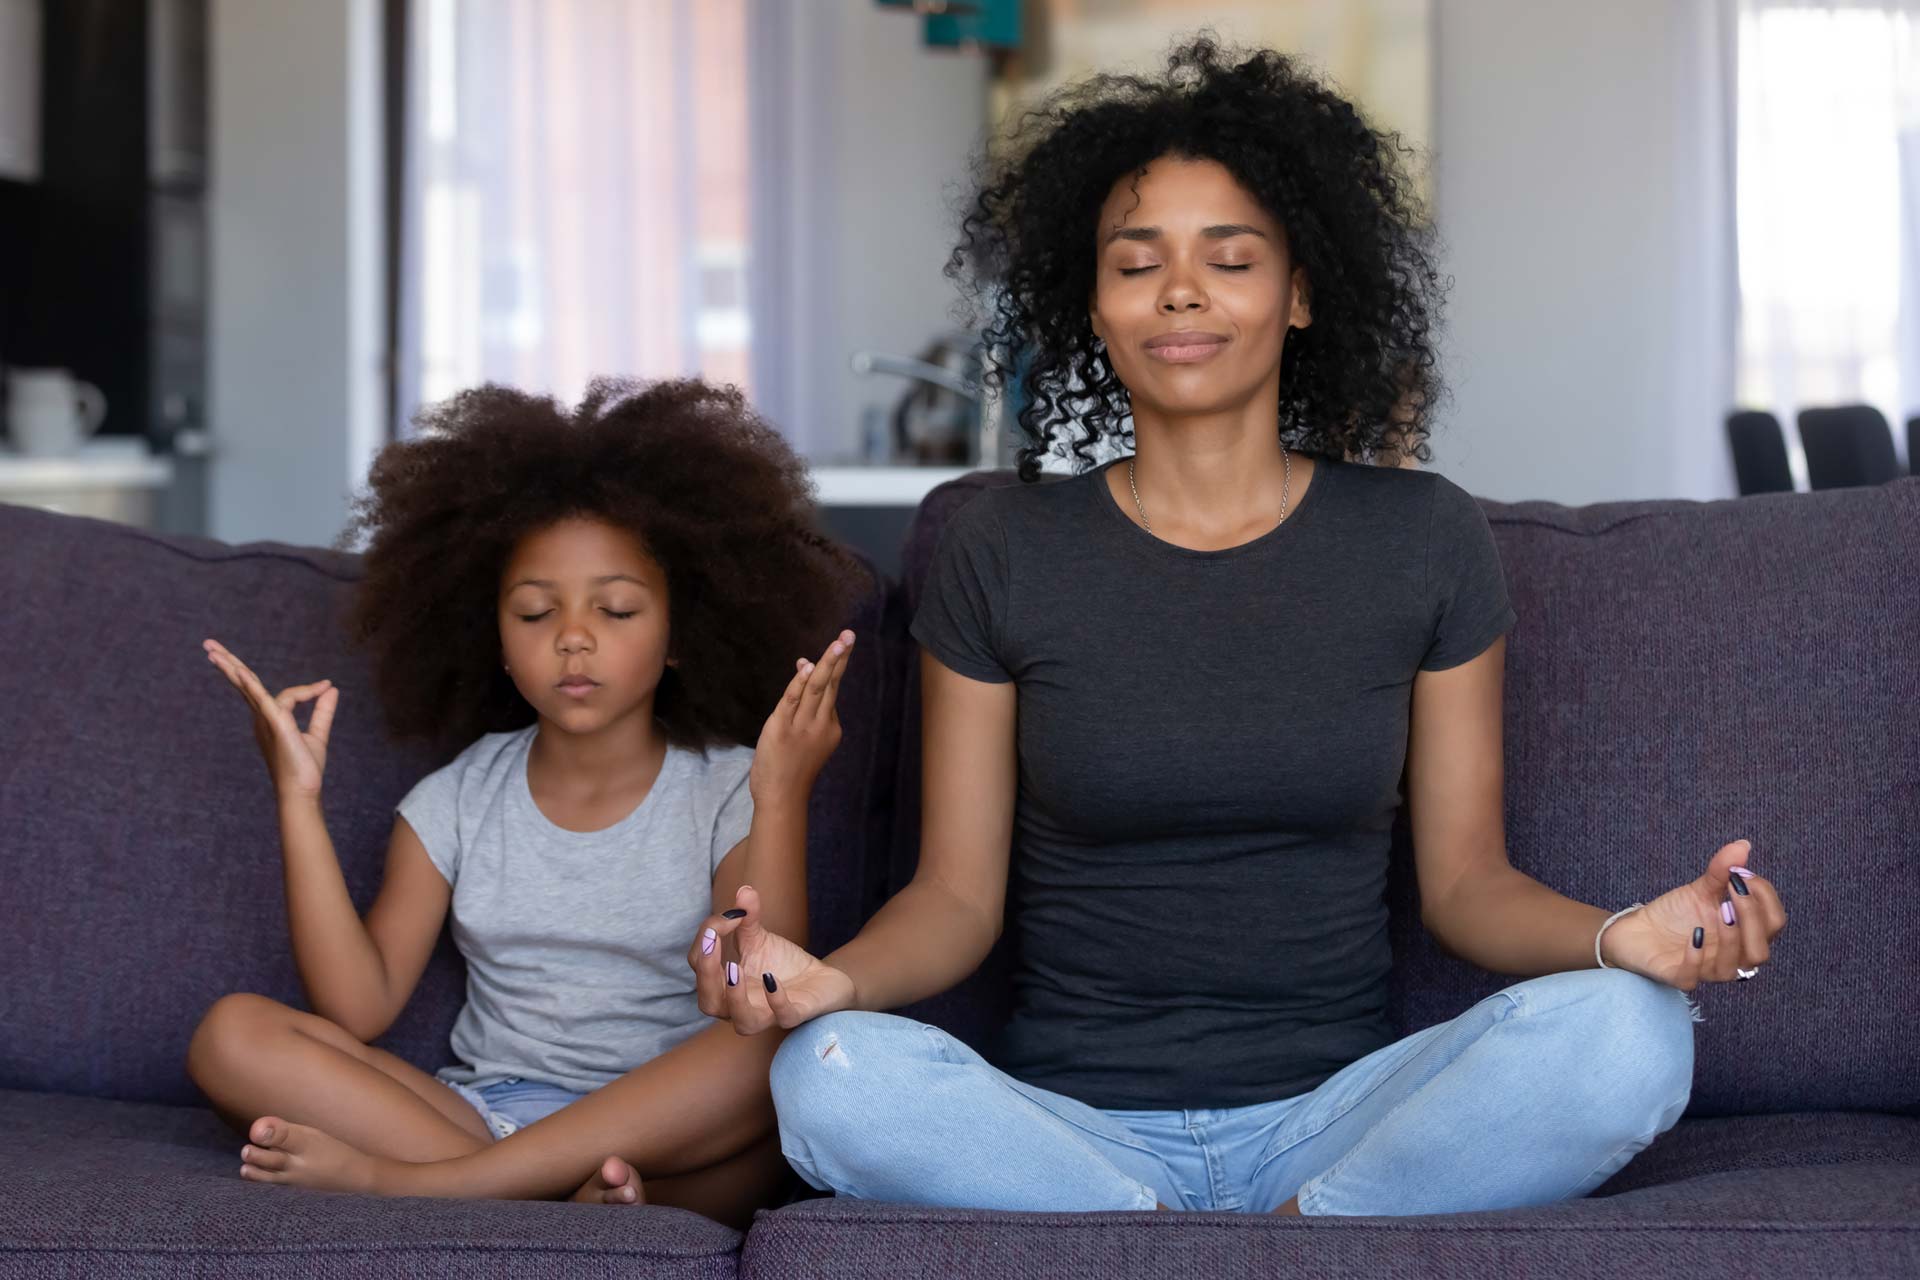 Is Meditation for Me? Learning How to Relax the Right Way